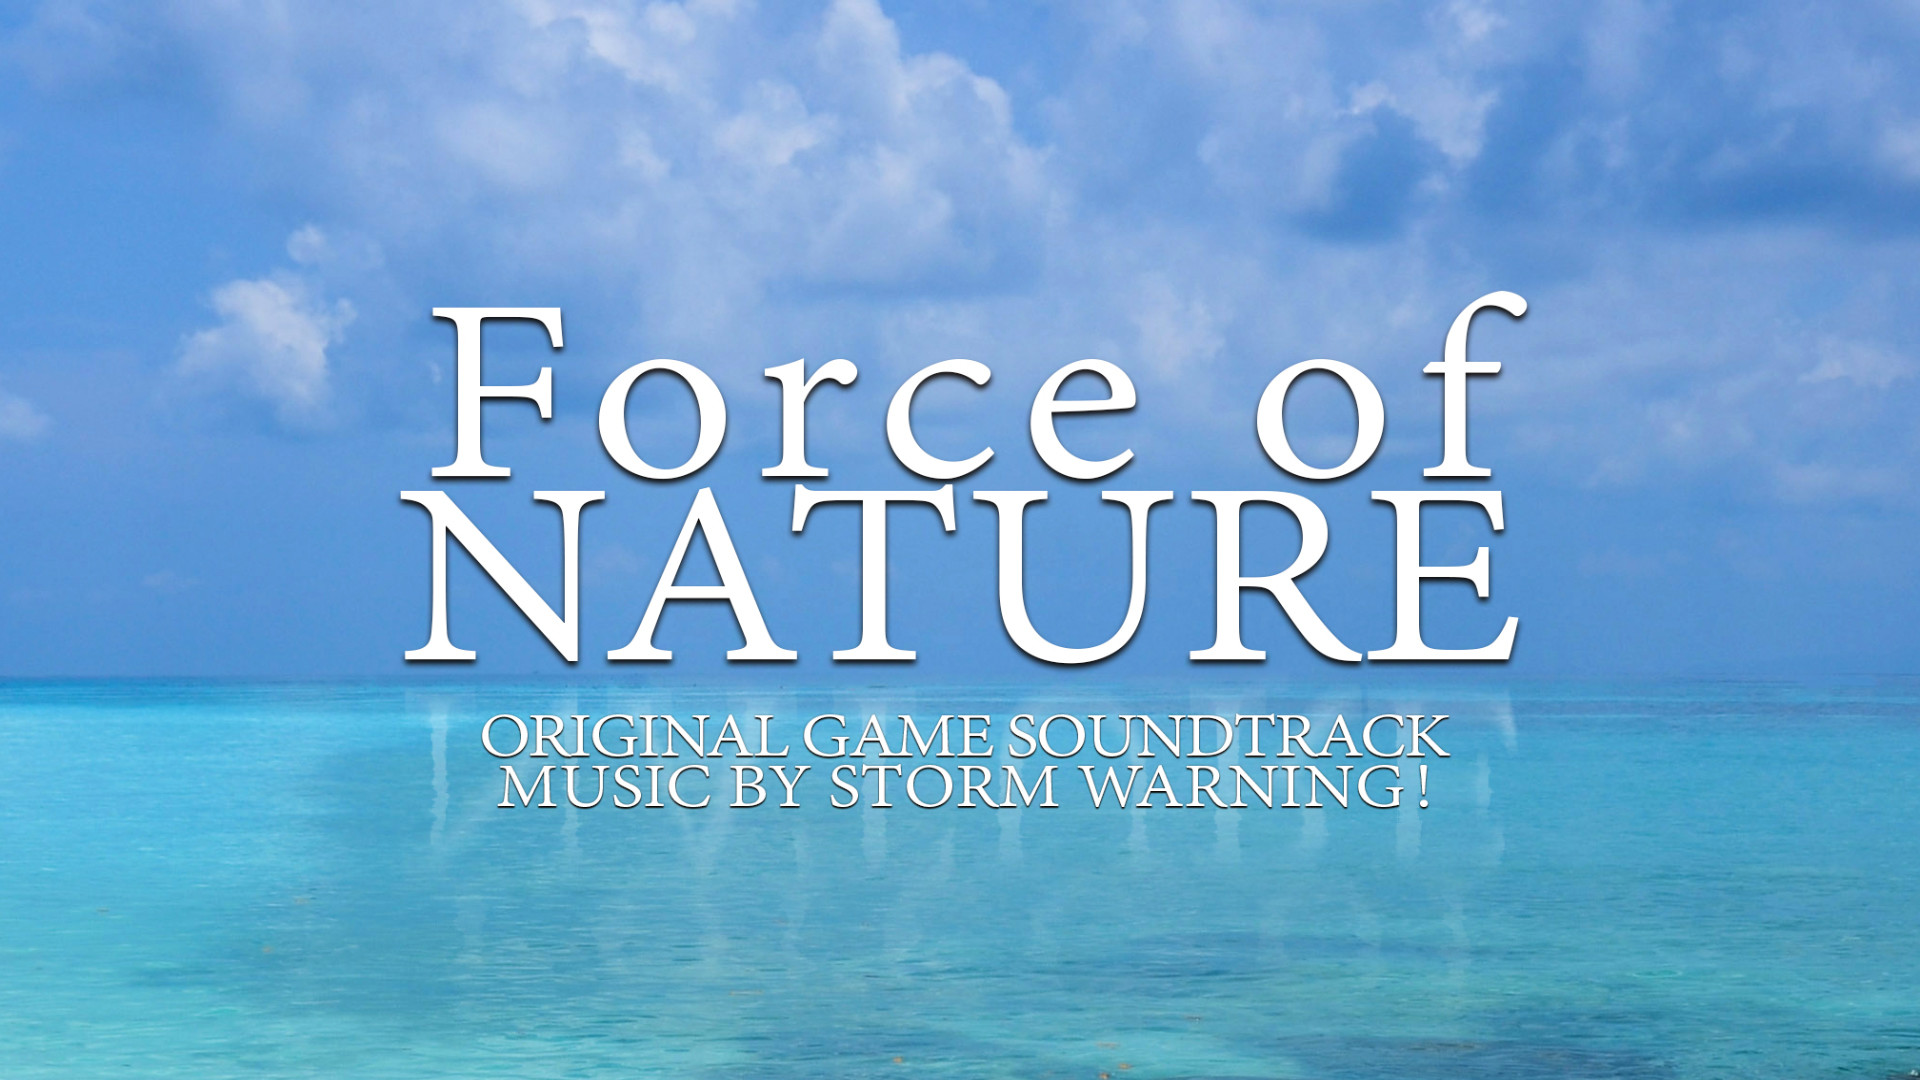 Force of Nature Soundtrack Featured Screenshot #1